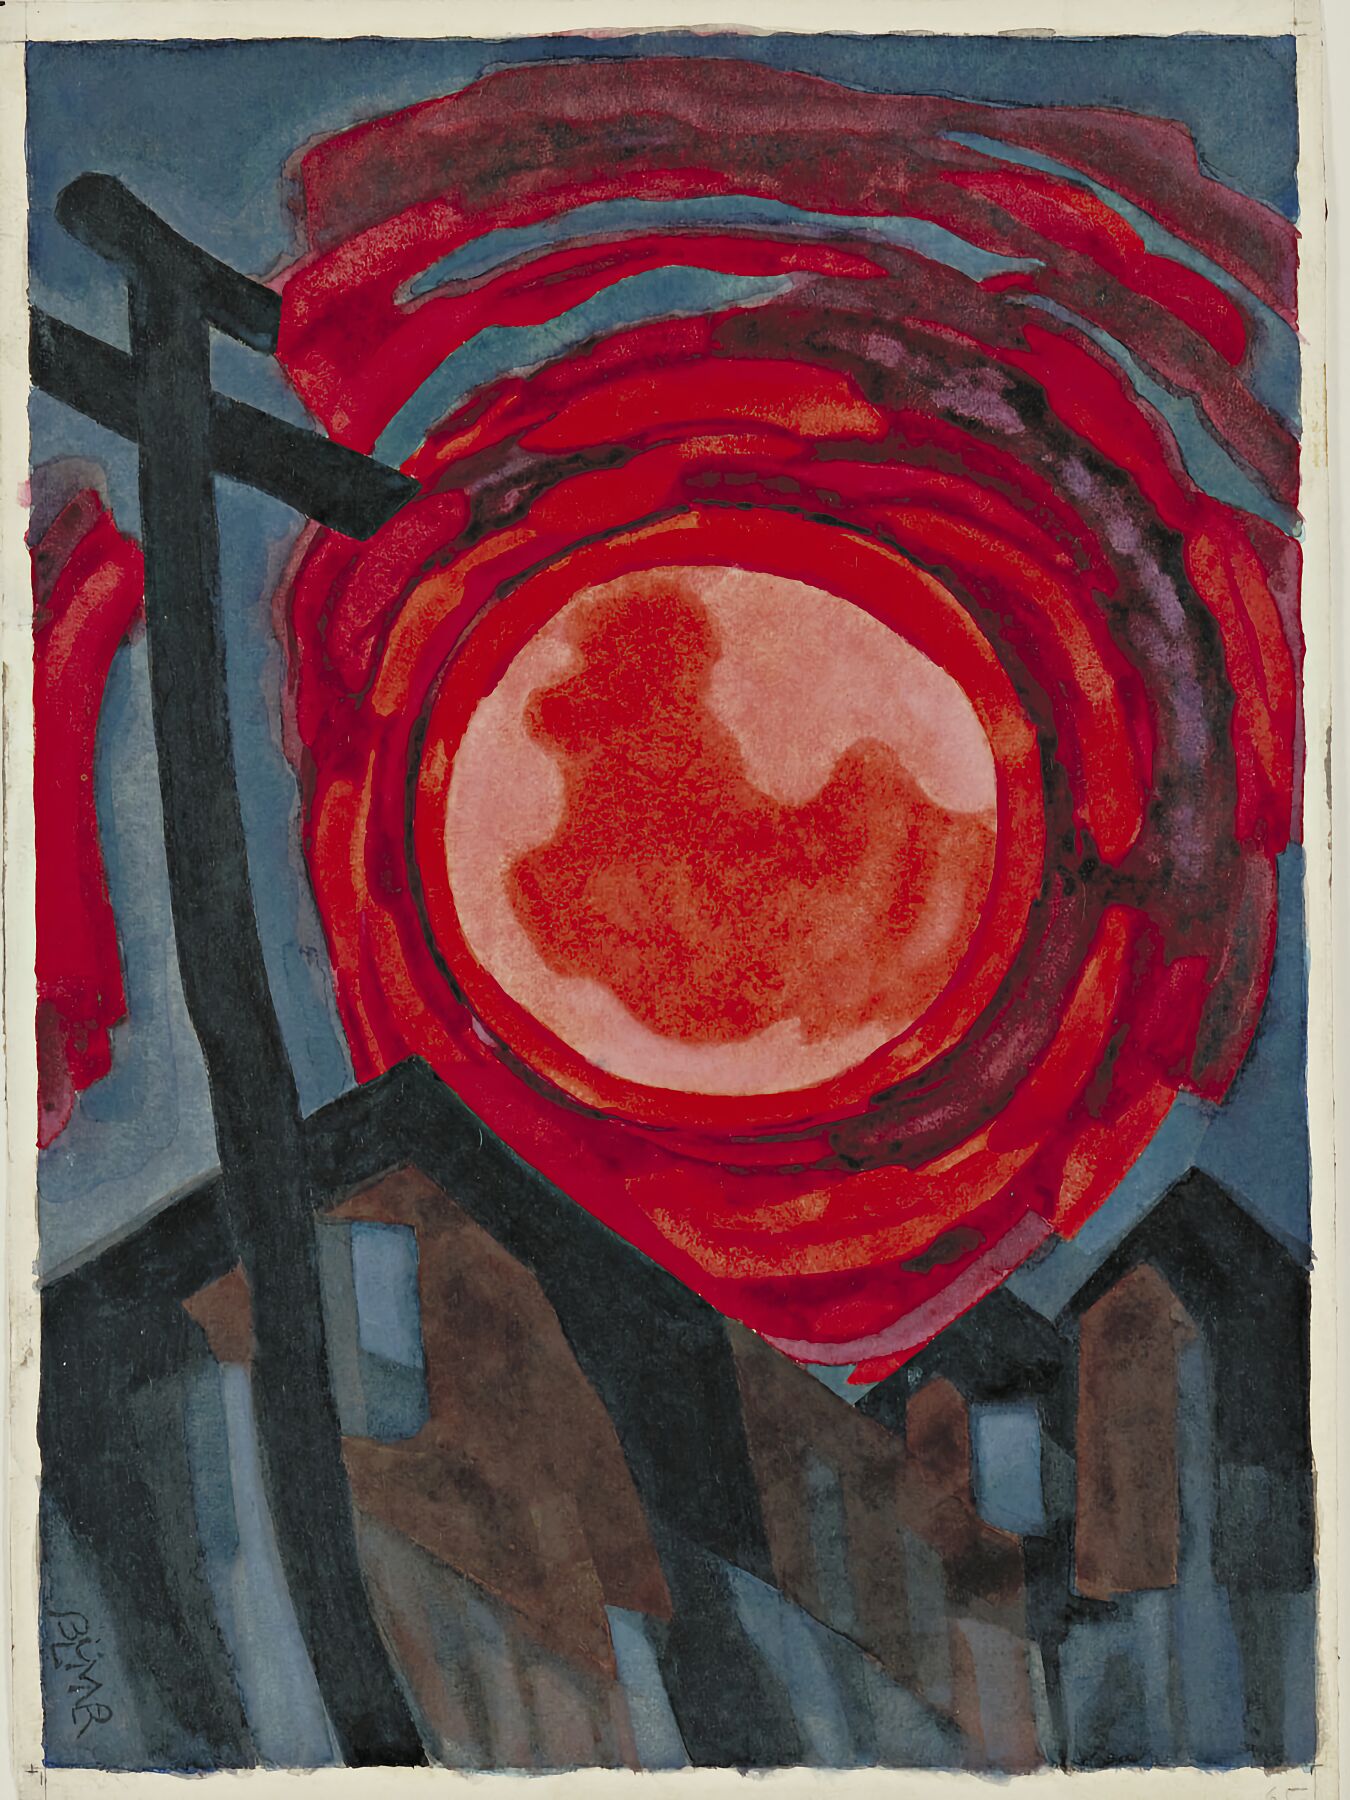 The Eye of Fate by Oscar Bluemner - 1927